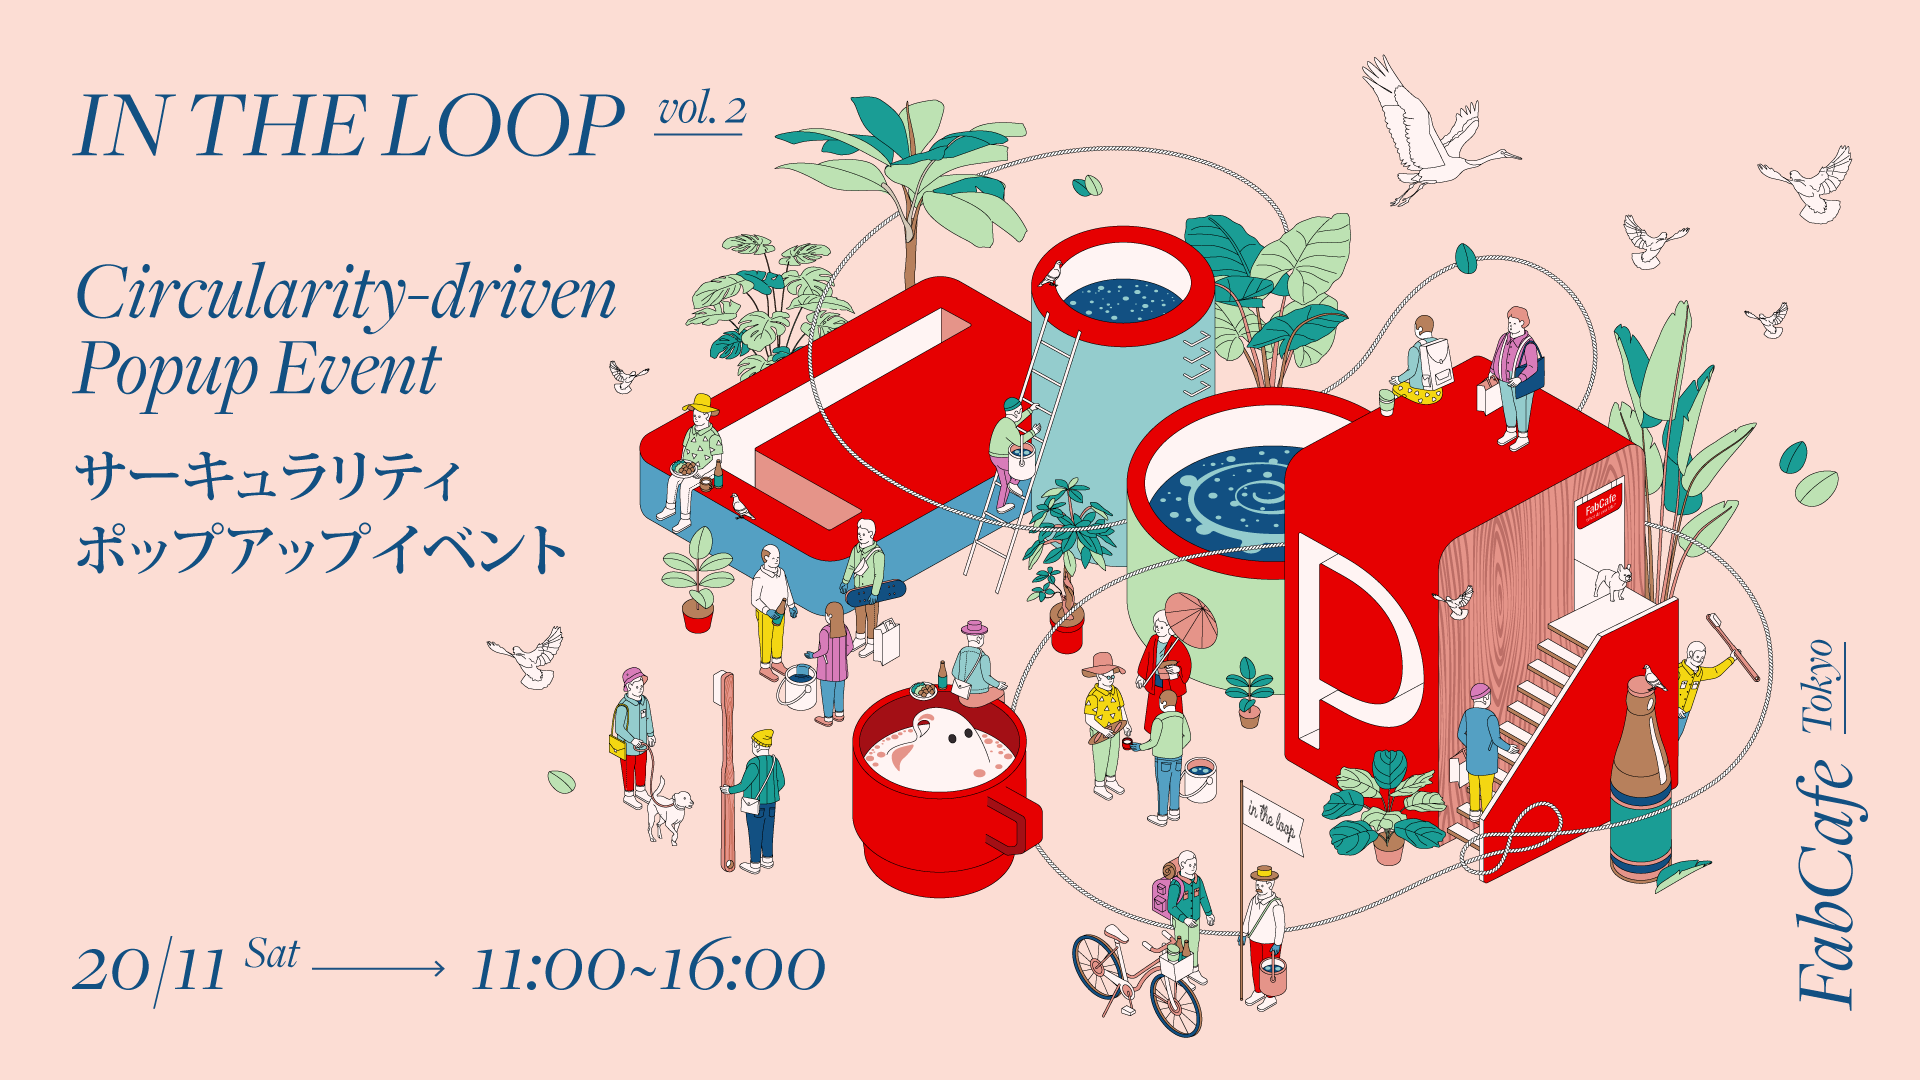 In the Loop, vol. 2 POPUPイベントに参加いたします！